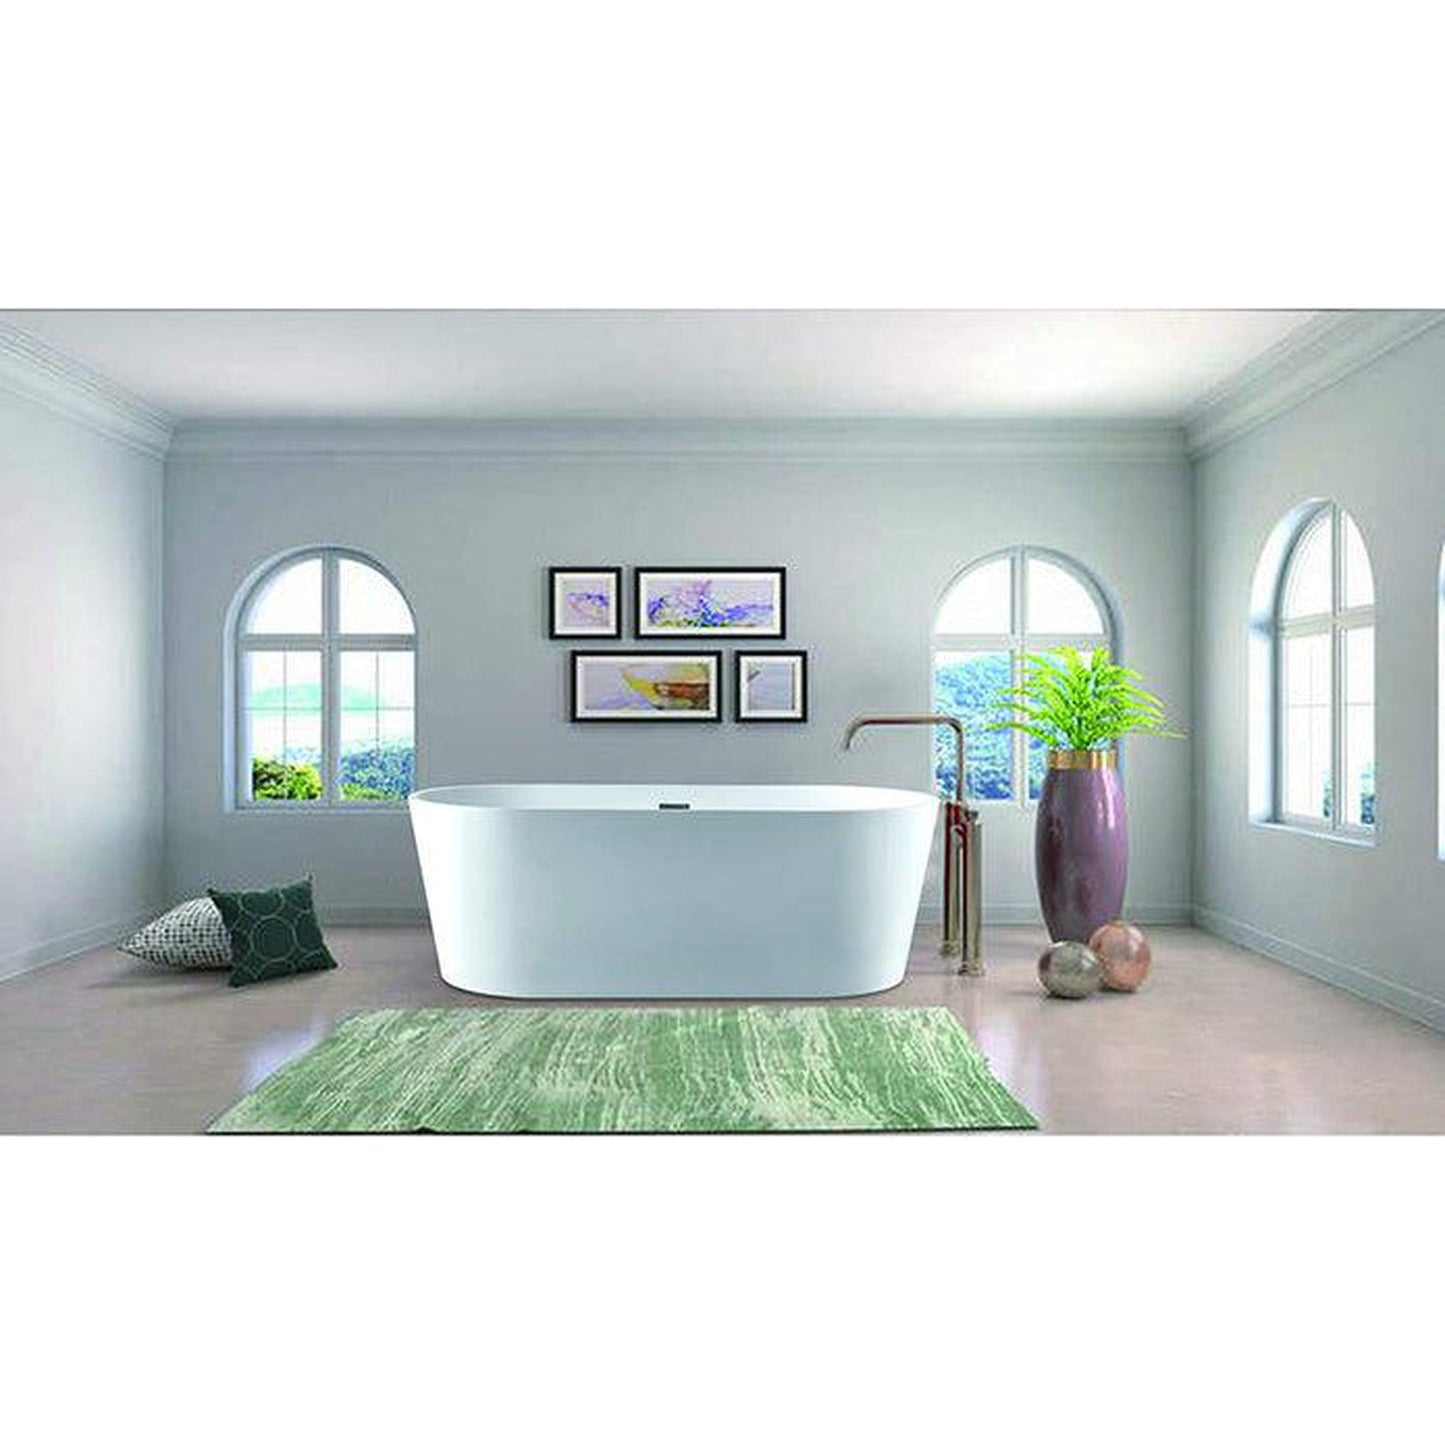 Vanity Art VA6901 67" White Acrylic Freestanding Bathtub With Slotted Polished Chrome Overflow and Pop-up Drain